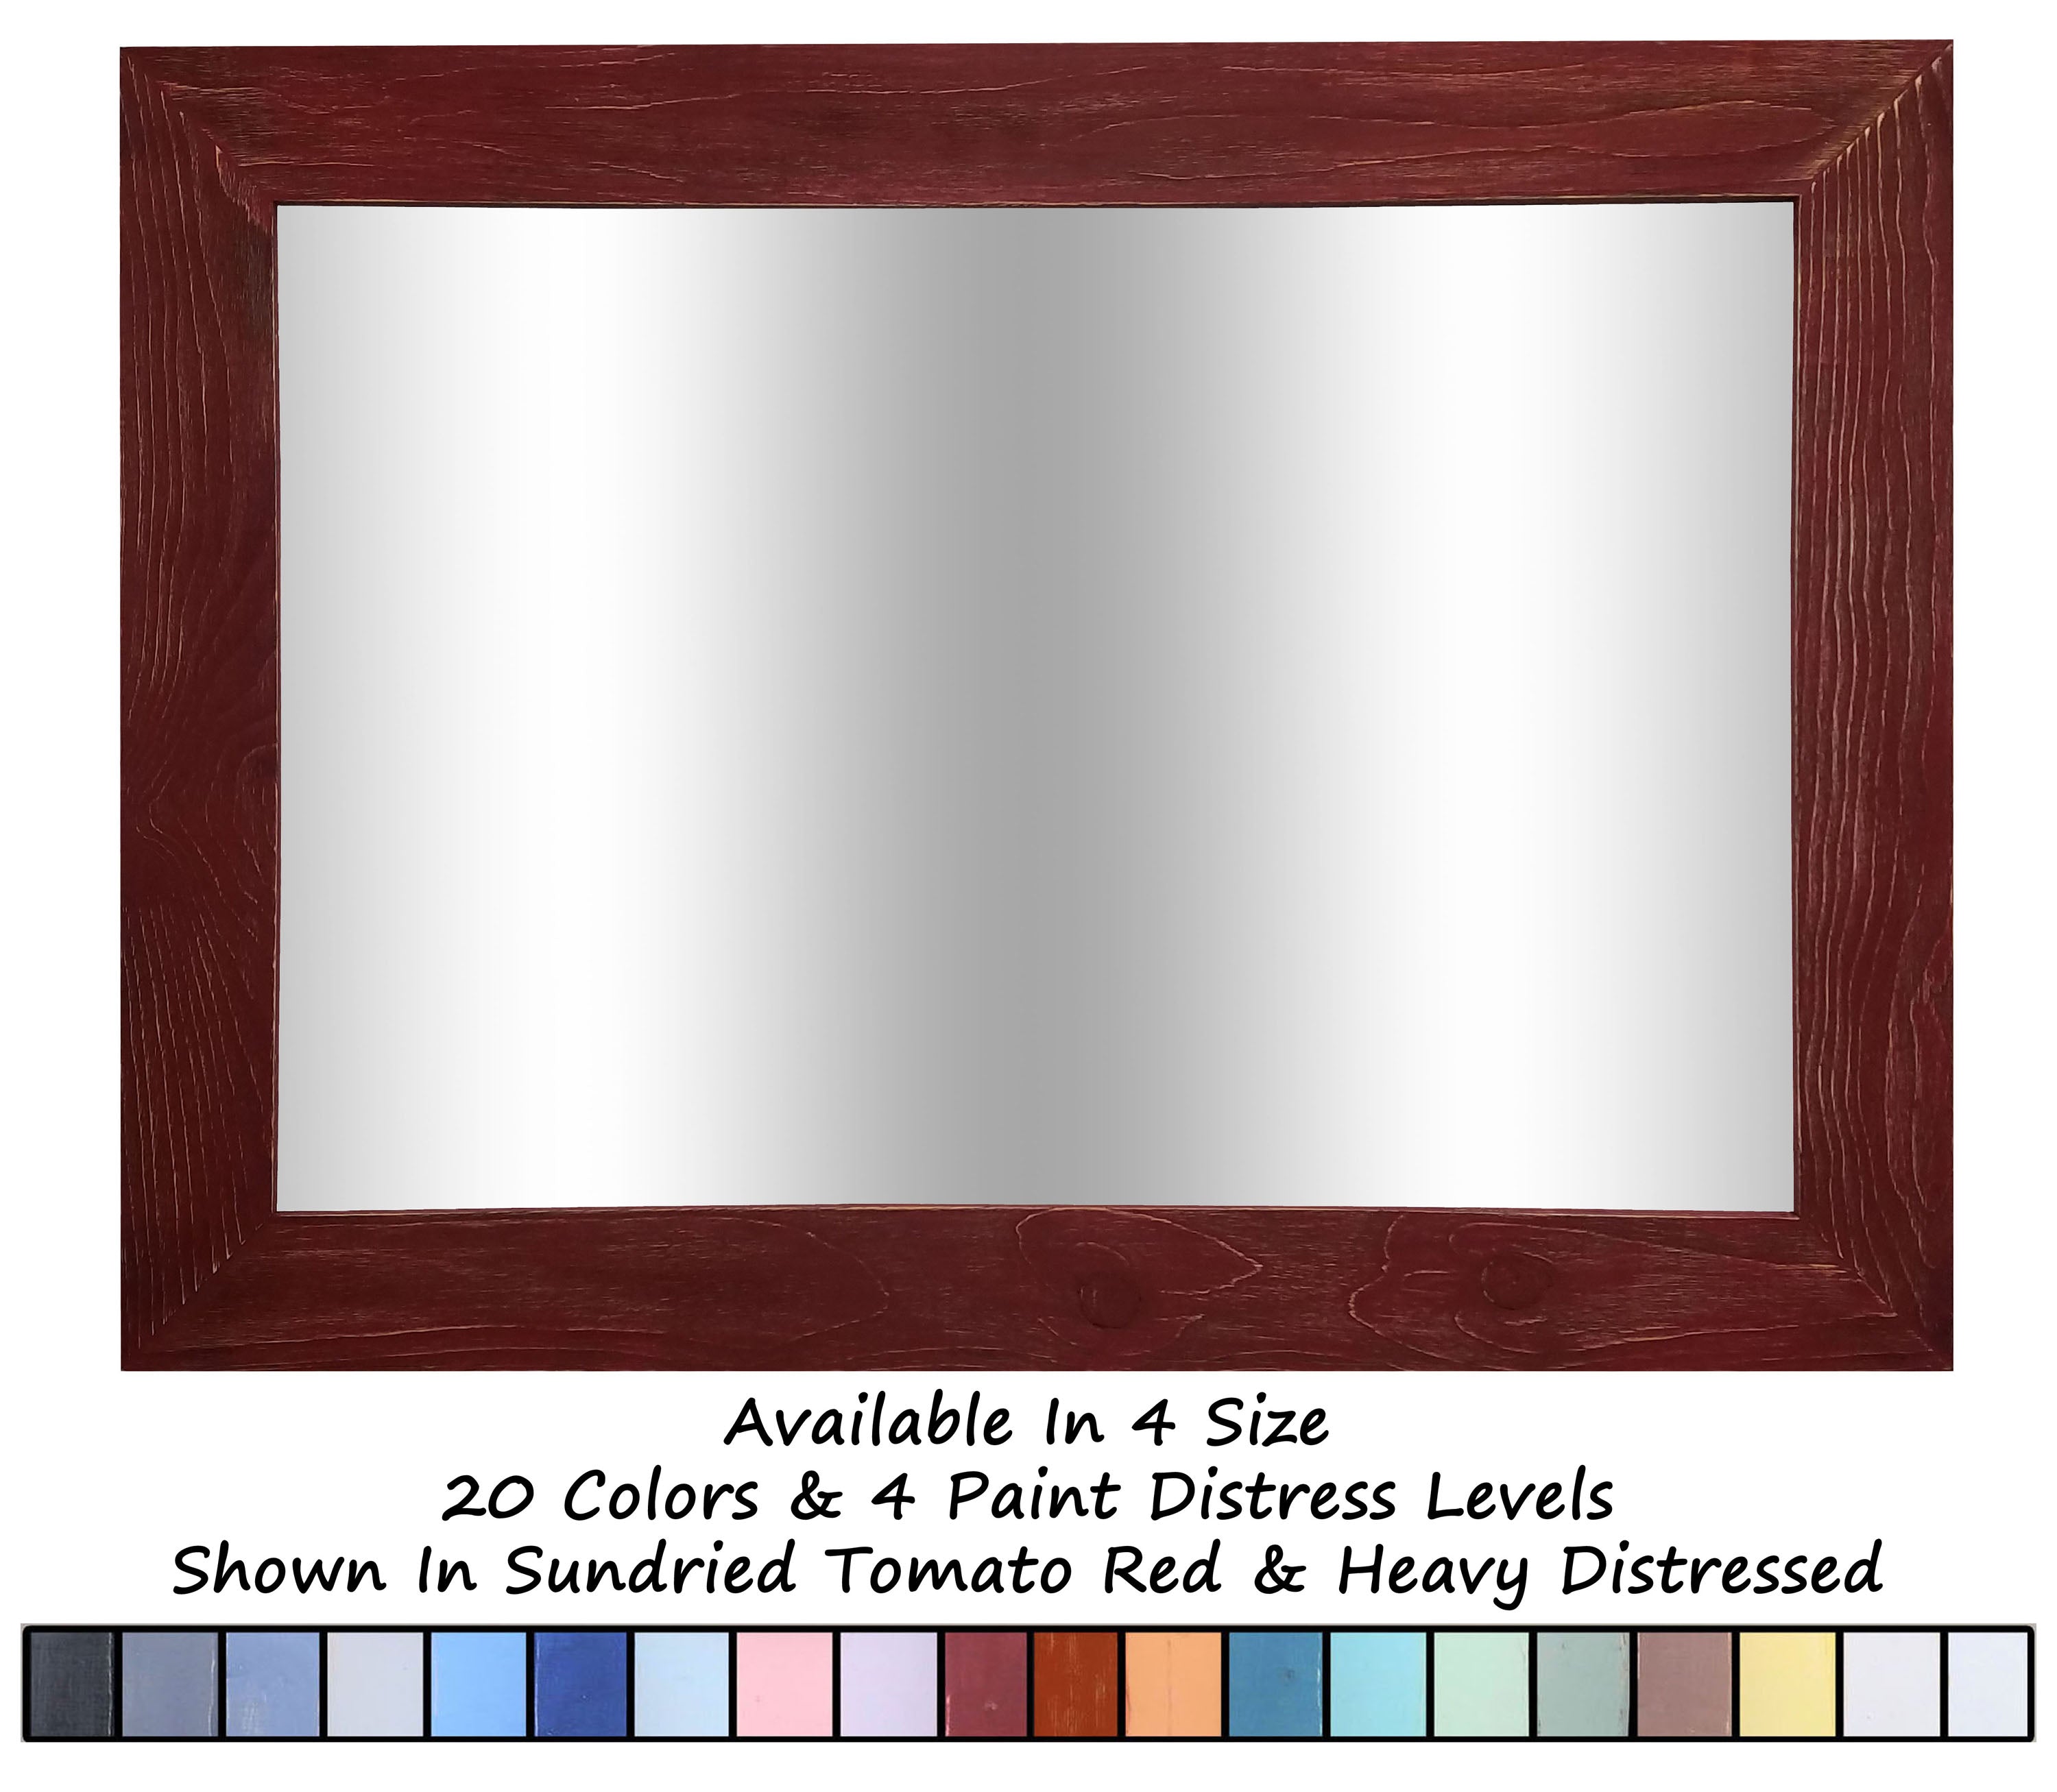 Shiplap Rustic Reclaimed Styled Framed Mirror, Handmade in the USA